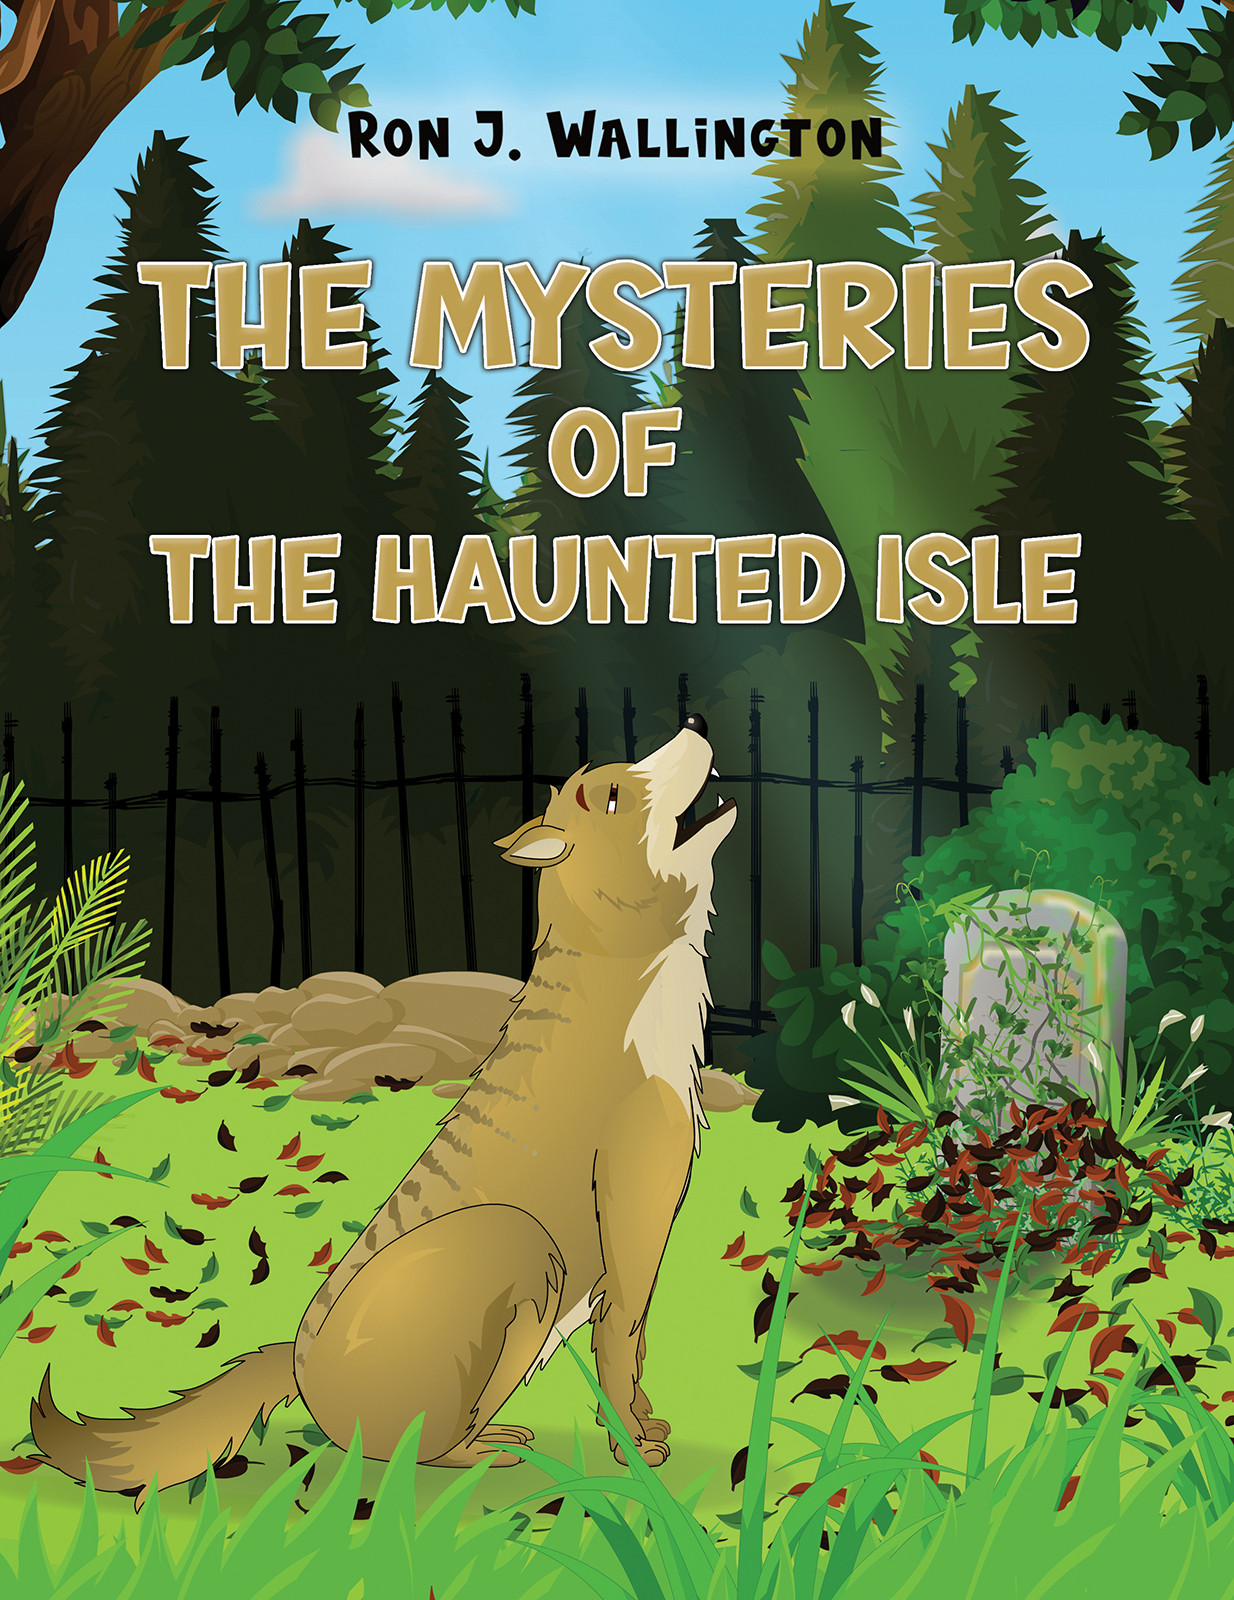 The Mysteries of The Haunted Isle